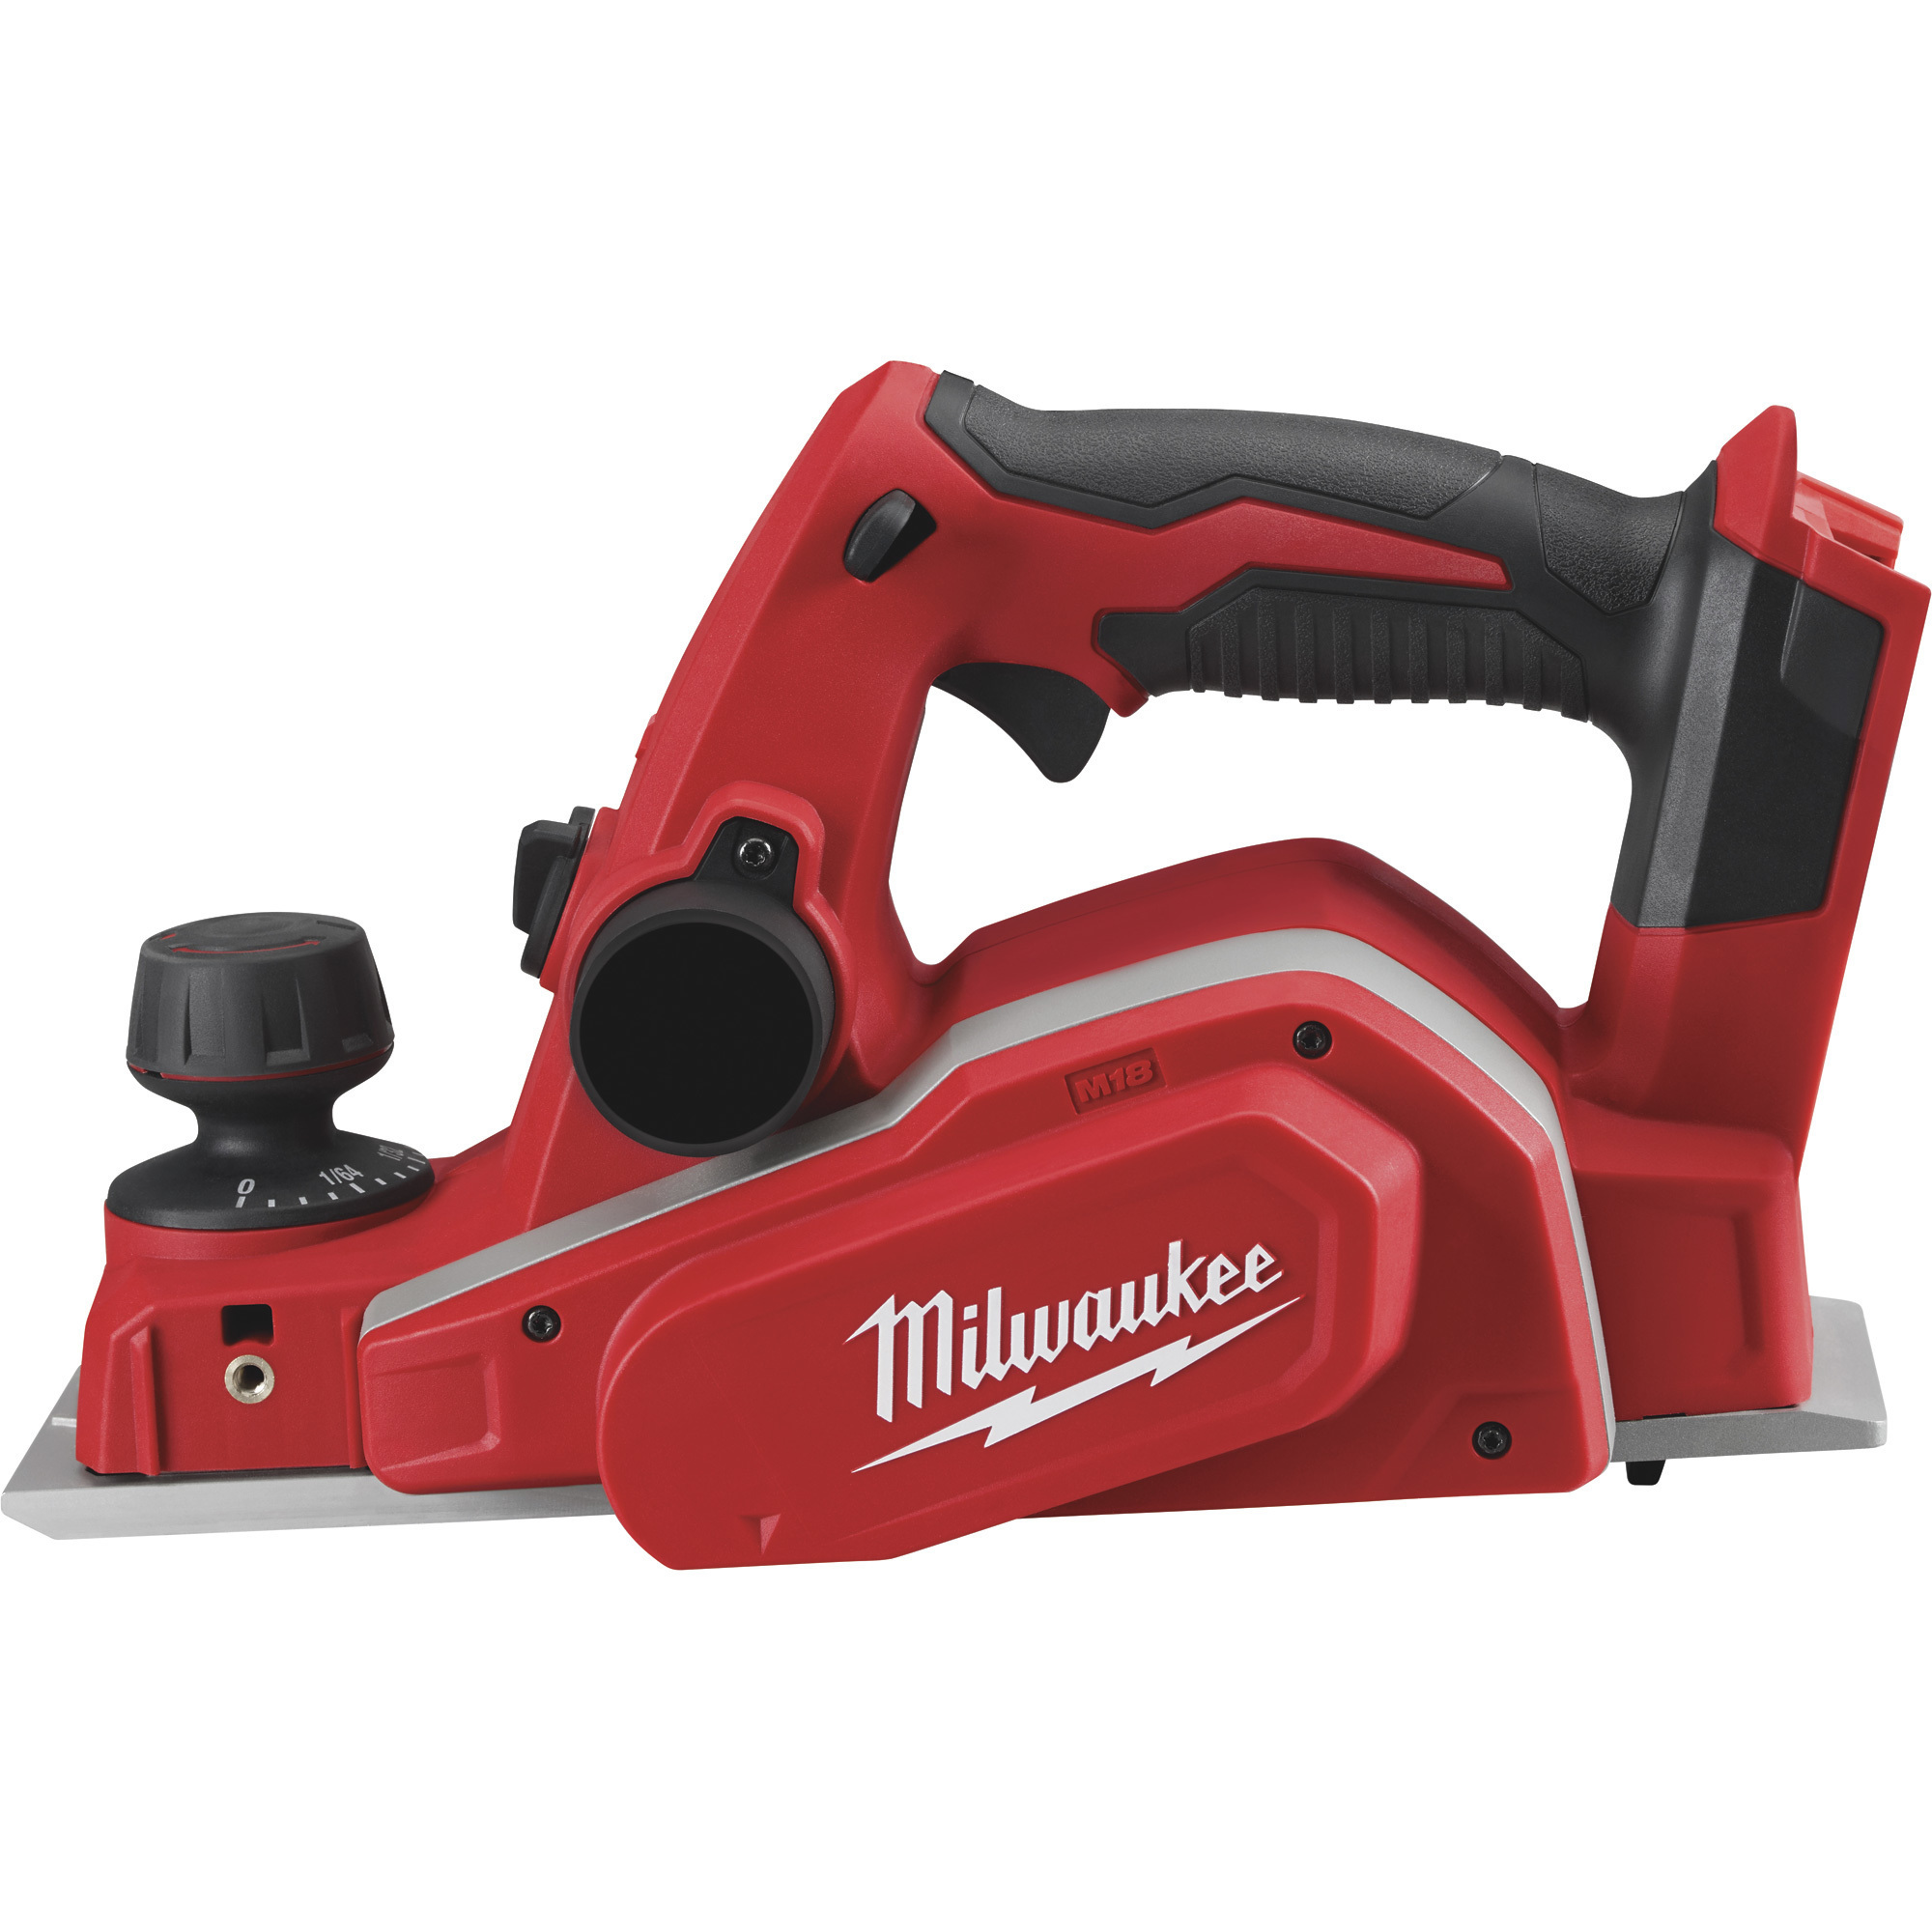 Milwaukee M18 3 1/4Inch Hand Wood Planer, Tool Only, Model 2623-20